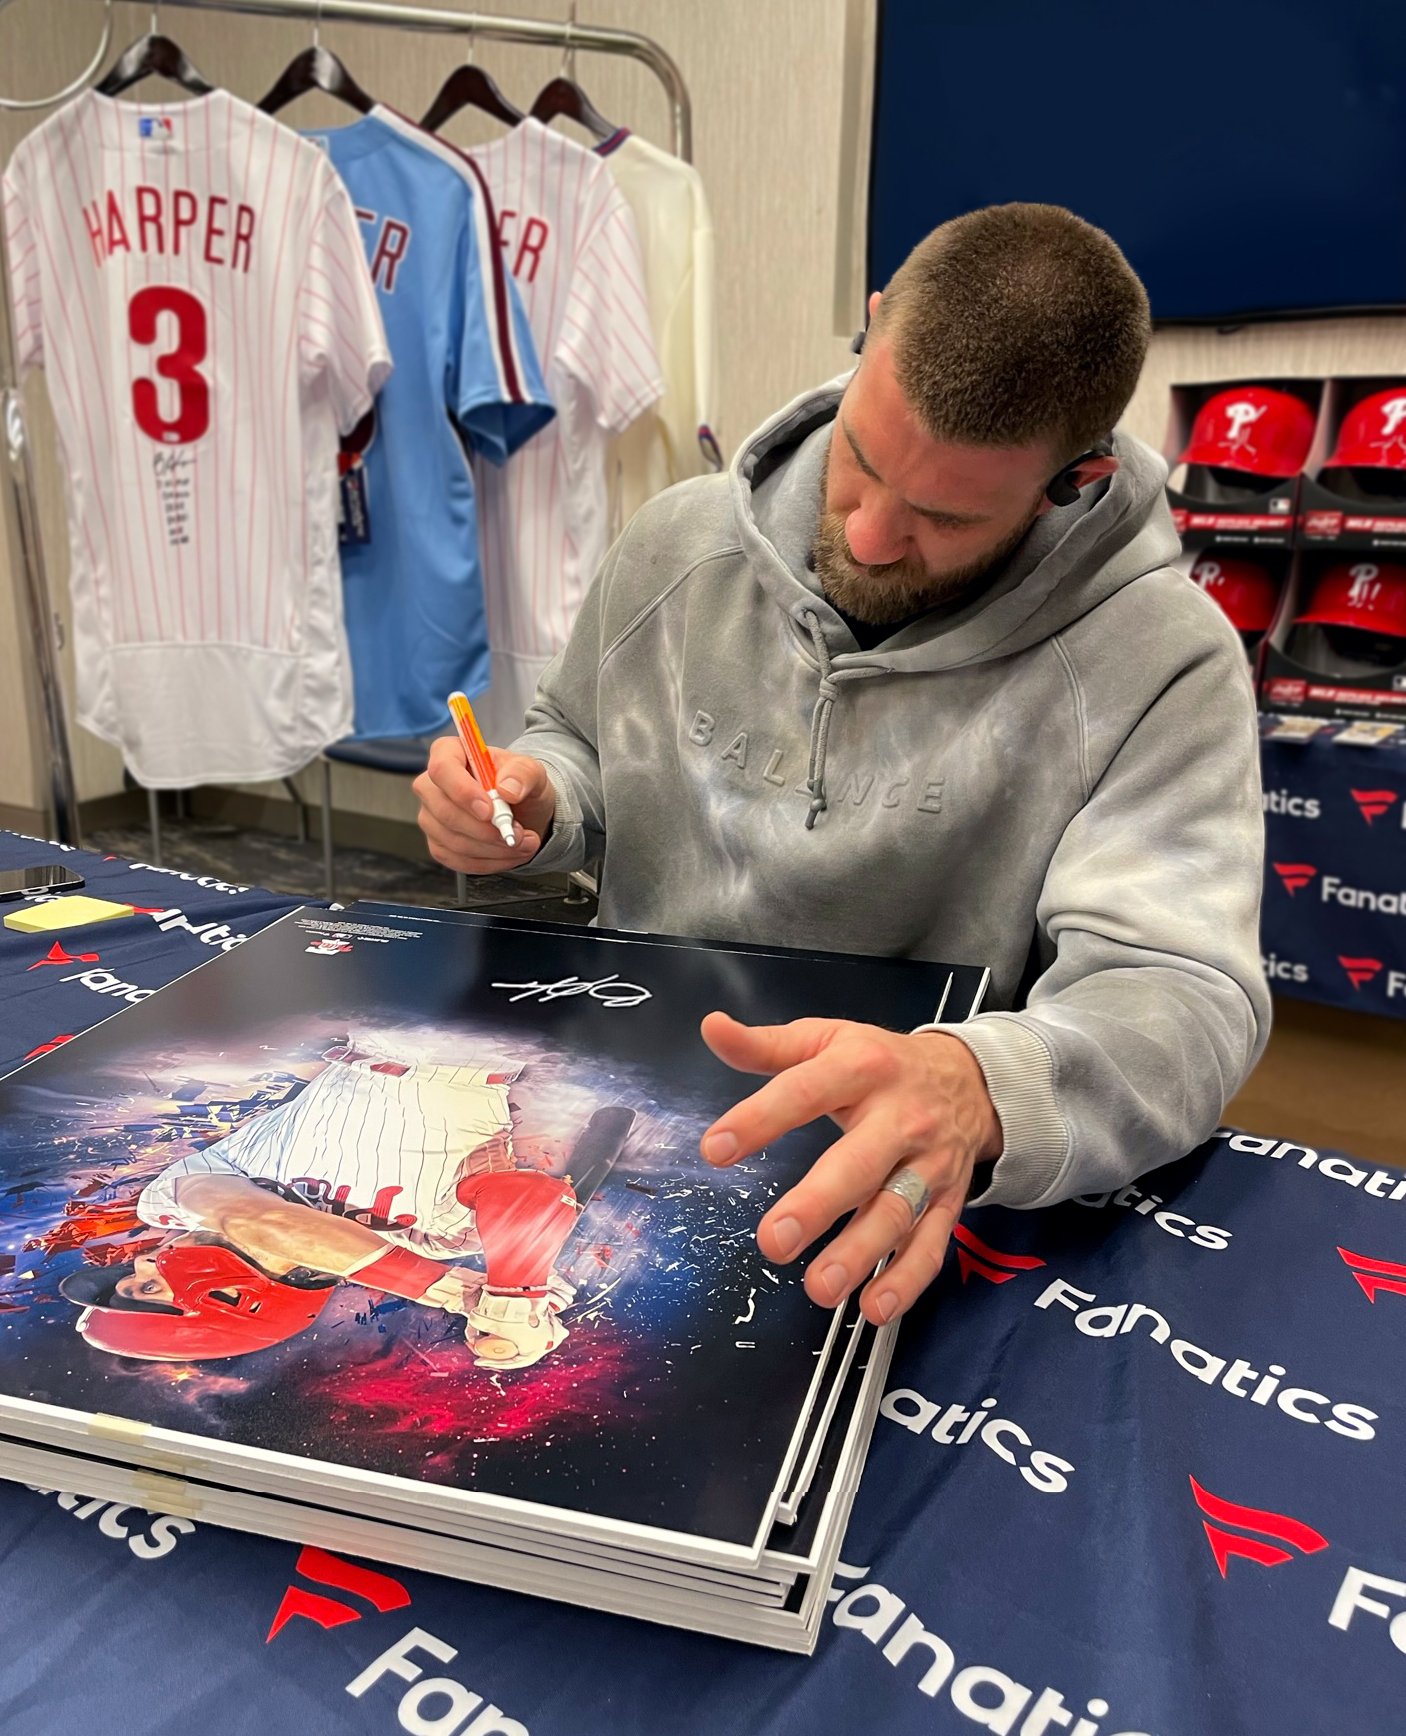 Bryce Harper in Exclusive Autograph, Game-Used Deal with Fanatics